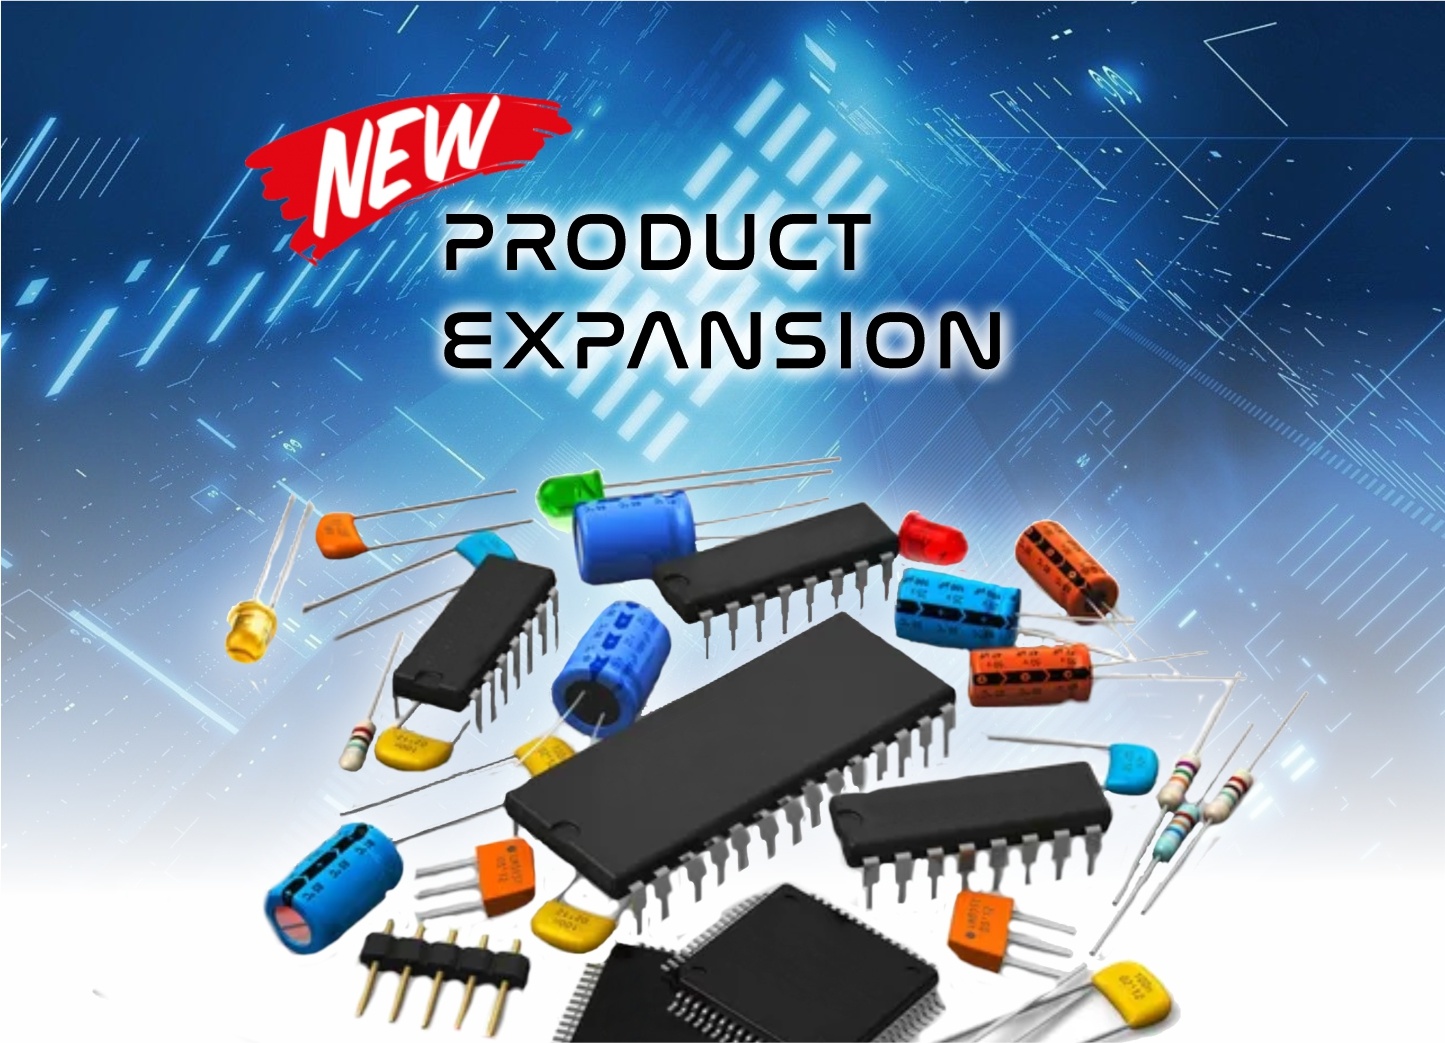 New product expansion contact letter -- WTL components